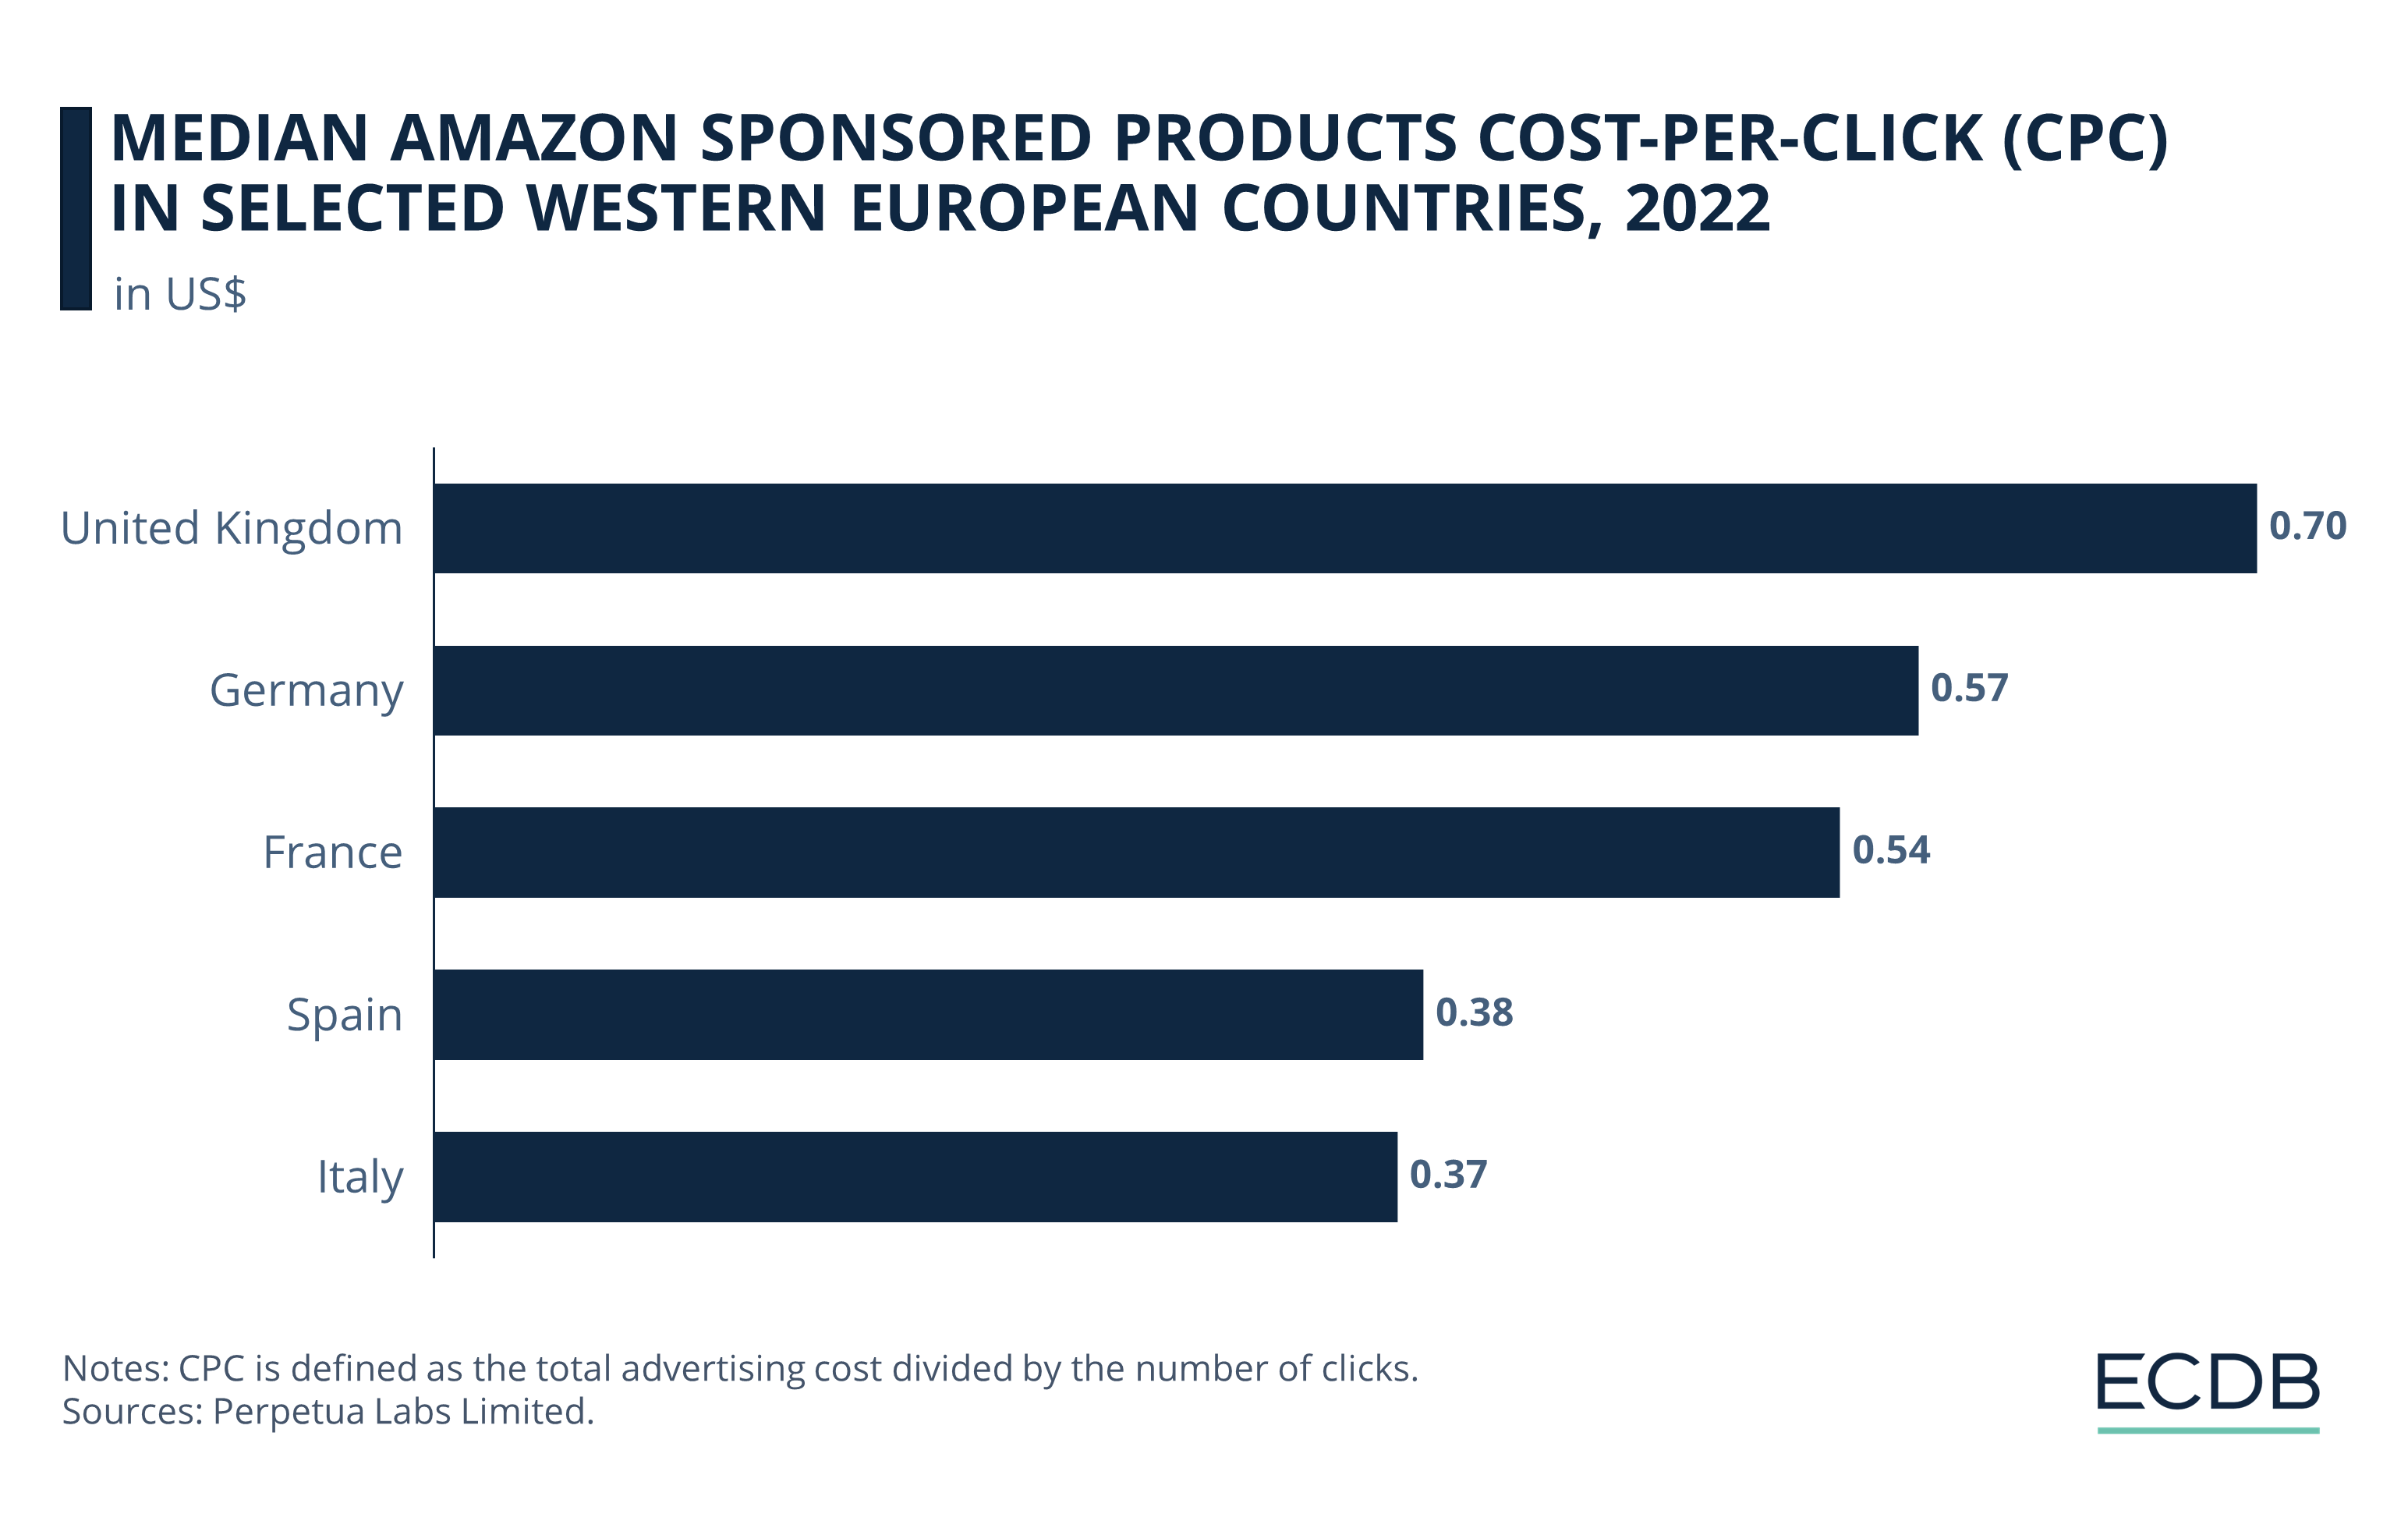 Amazon Median Sponsored Products CPC in Selected Western European Countries